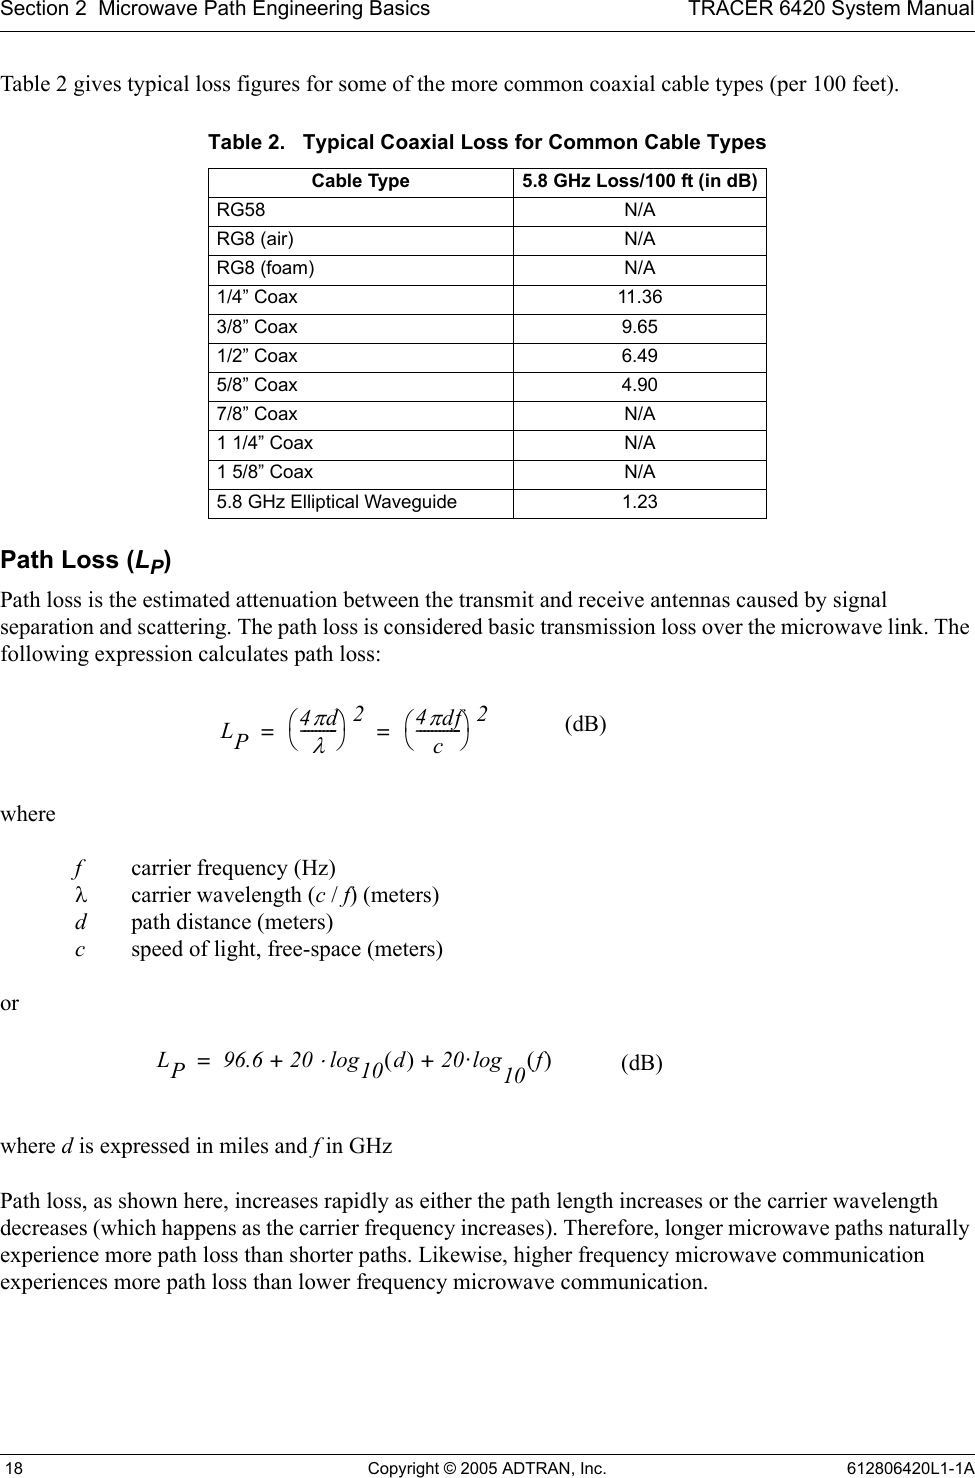 Section 2  Microwave Path Engineering Basics TRACER 6420 System Manual 18 Copyright © 2005 ADTRAN, Inc. 612806420L1-1ATable 2 gives typical loss figures for some of the more common coaxial cable types (per 100 feet).Path Loss (LP)Path loss is the estimated attenuation between the transmit and receive antennas caused by signal separation and scattering. The path loss is considered basic transmission loss over the microwave link. The following expression calculates path loss:where fcarrier frequency (Hz) λcarrier wavelength (c / f) (meters) dpath distance (meters) cspeed of light, free-space (meters)orwhere d is expressed in miles and f in GHzPath loss, as shown here, increases rapidly as either the path length increases or the carrier wavelength decreases (which happens as the carrier frequency increases). Therefore, longer microwave paths naturally experience more path loss than shorter paths. Likewise, higher frequency microwave communication experiences more path loss than lower frequency microwave communication.Table 2.   Typical Coaxial Loss for Common Cable TypesCable Type 5.8 GHz Loss/100 ft (in dB)RG58 N/ARG8 (air) N/ARG8 (foam) N/A1/4” Coax 11.363/8” Coax 9.651/2” Coax 6.495/8” Coax 4.907/8” Coax N/A1 1/4” Coax N/A1 5/8” Coax N/A5.8 GHz Elliptical Waveguide 1.23LP4πdλ----------⎝⎠⎛⎞24πdfc------------⎝⎠⎛⎞2== (dB)LP96.6 20 log10 d() 20·log+10 f()⋅+= (dB)